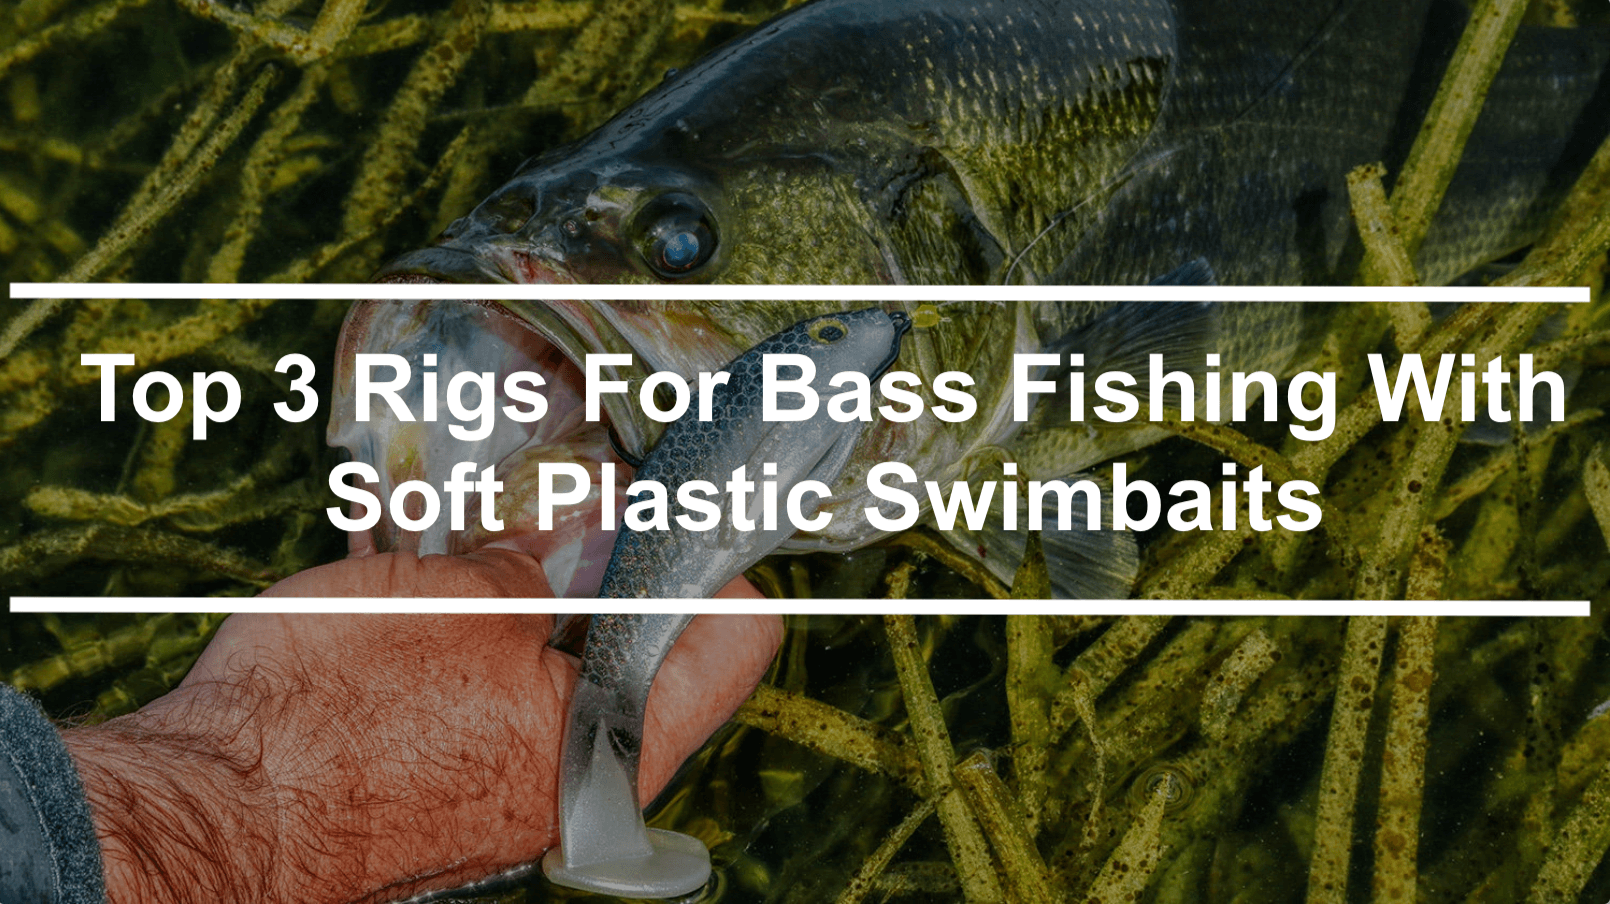 Top 3 Rigs For Bass Fishing With Soft Plastic Swimbaits